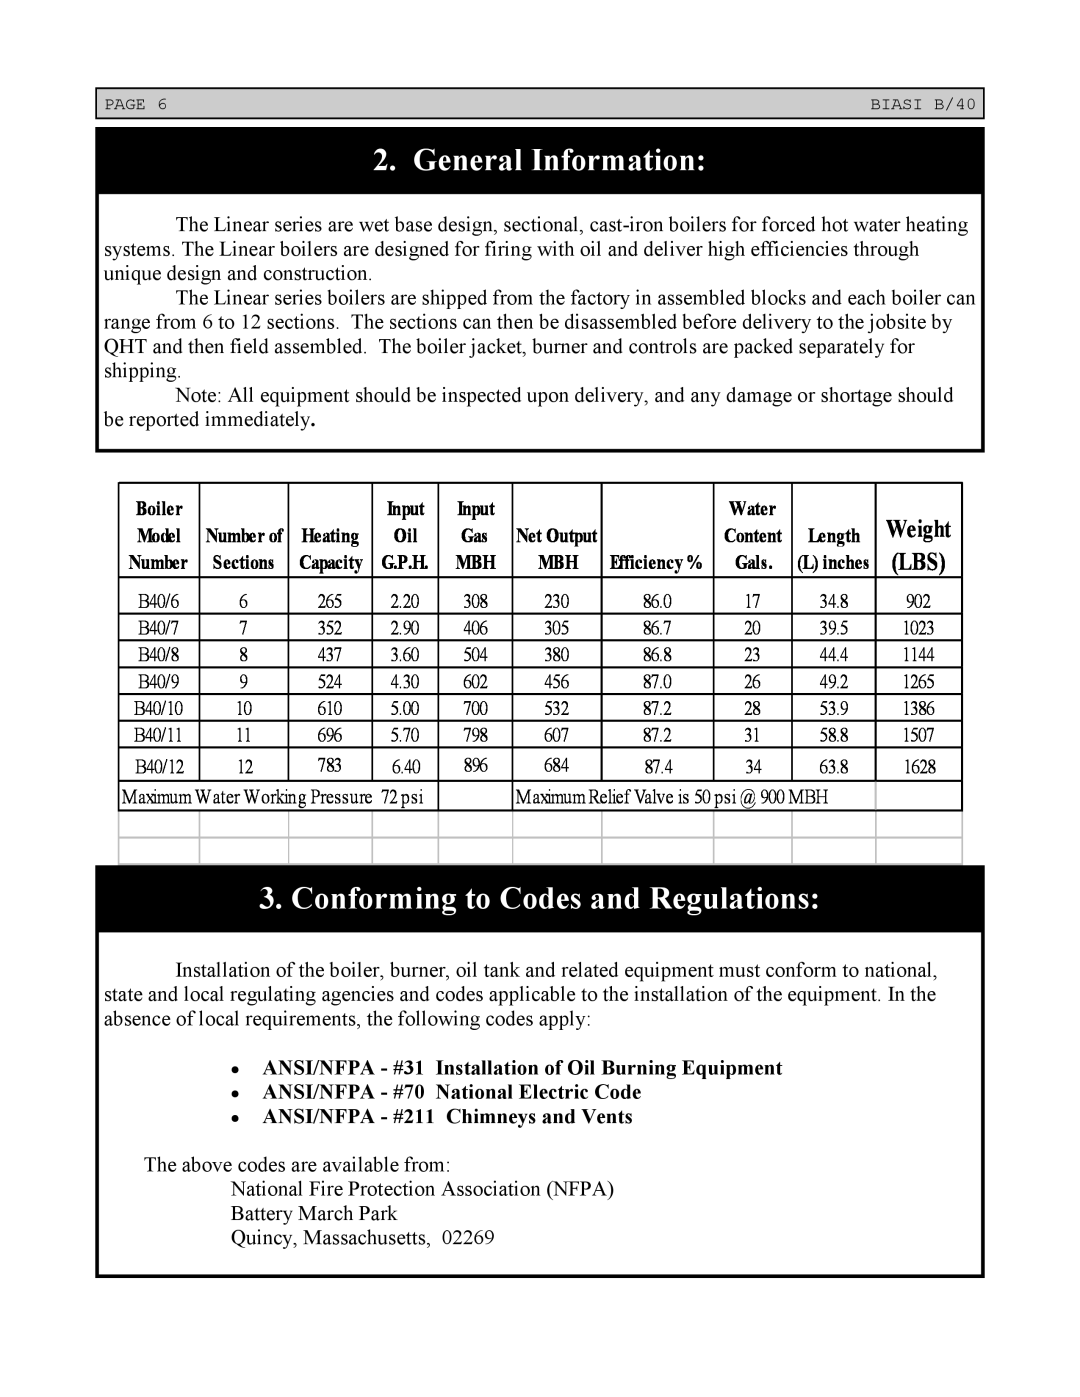 Linear Boiler General Information, Conforming to Codes and Regulations, Weight, ANSI/NFPA - #70 National Electric Code 